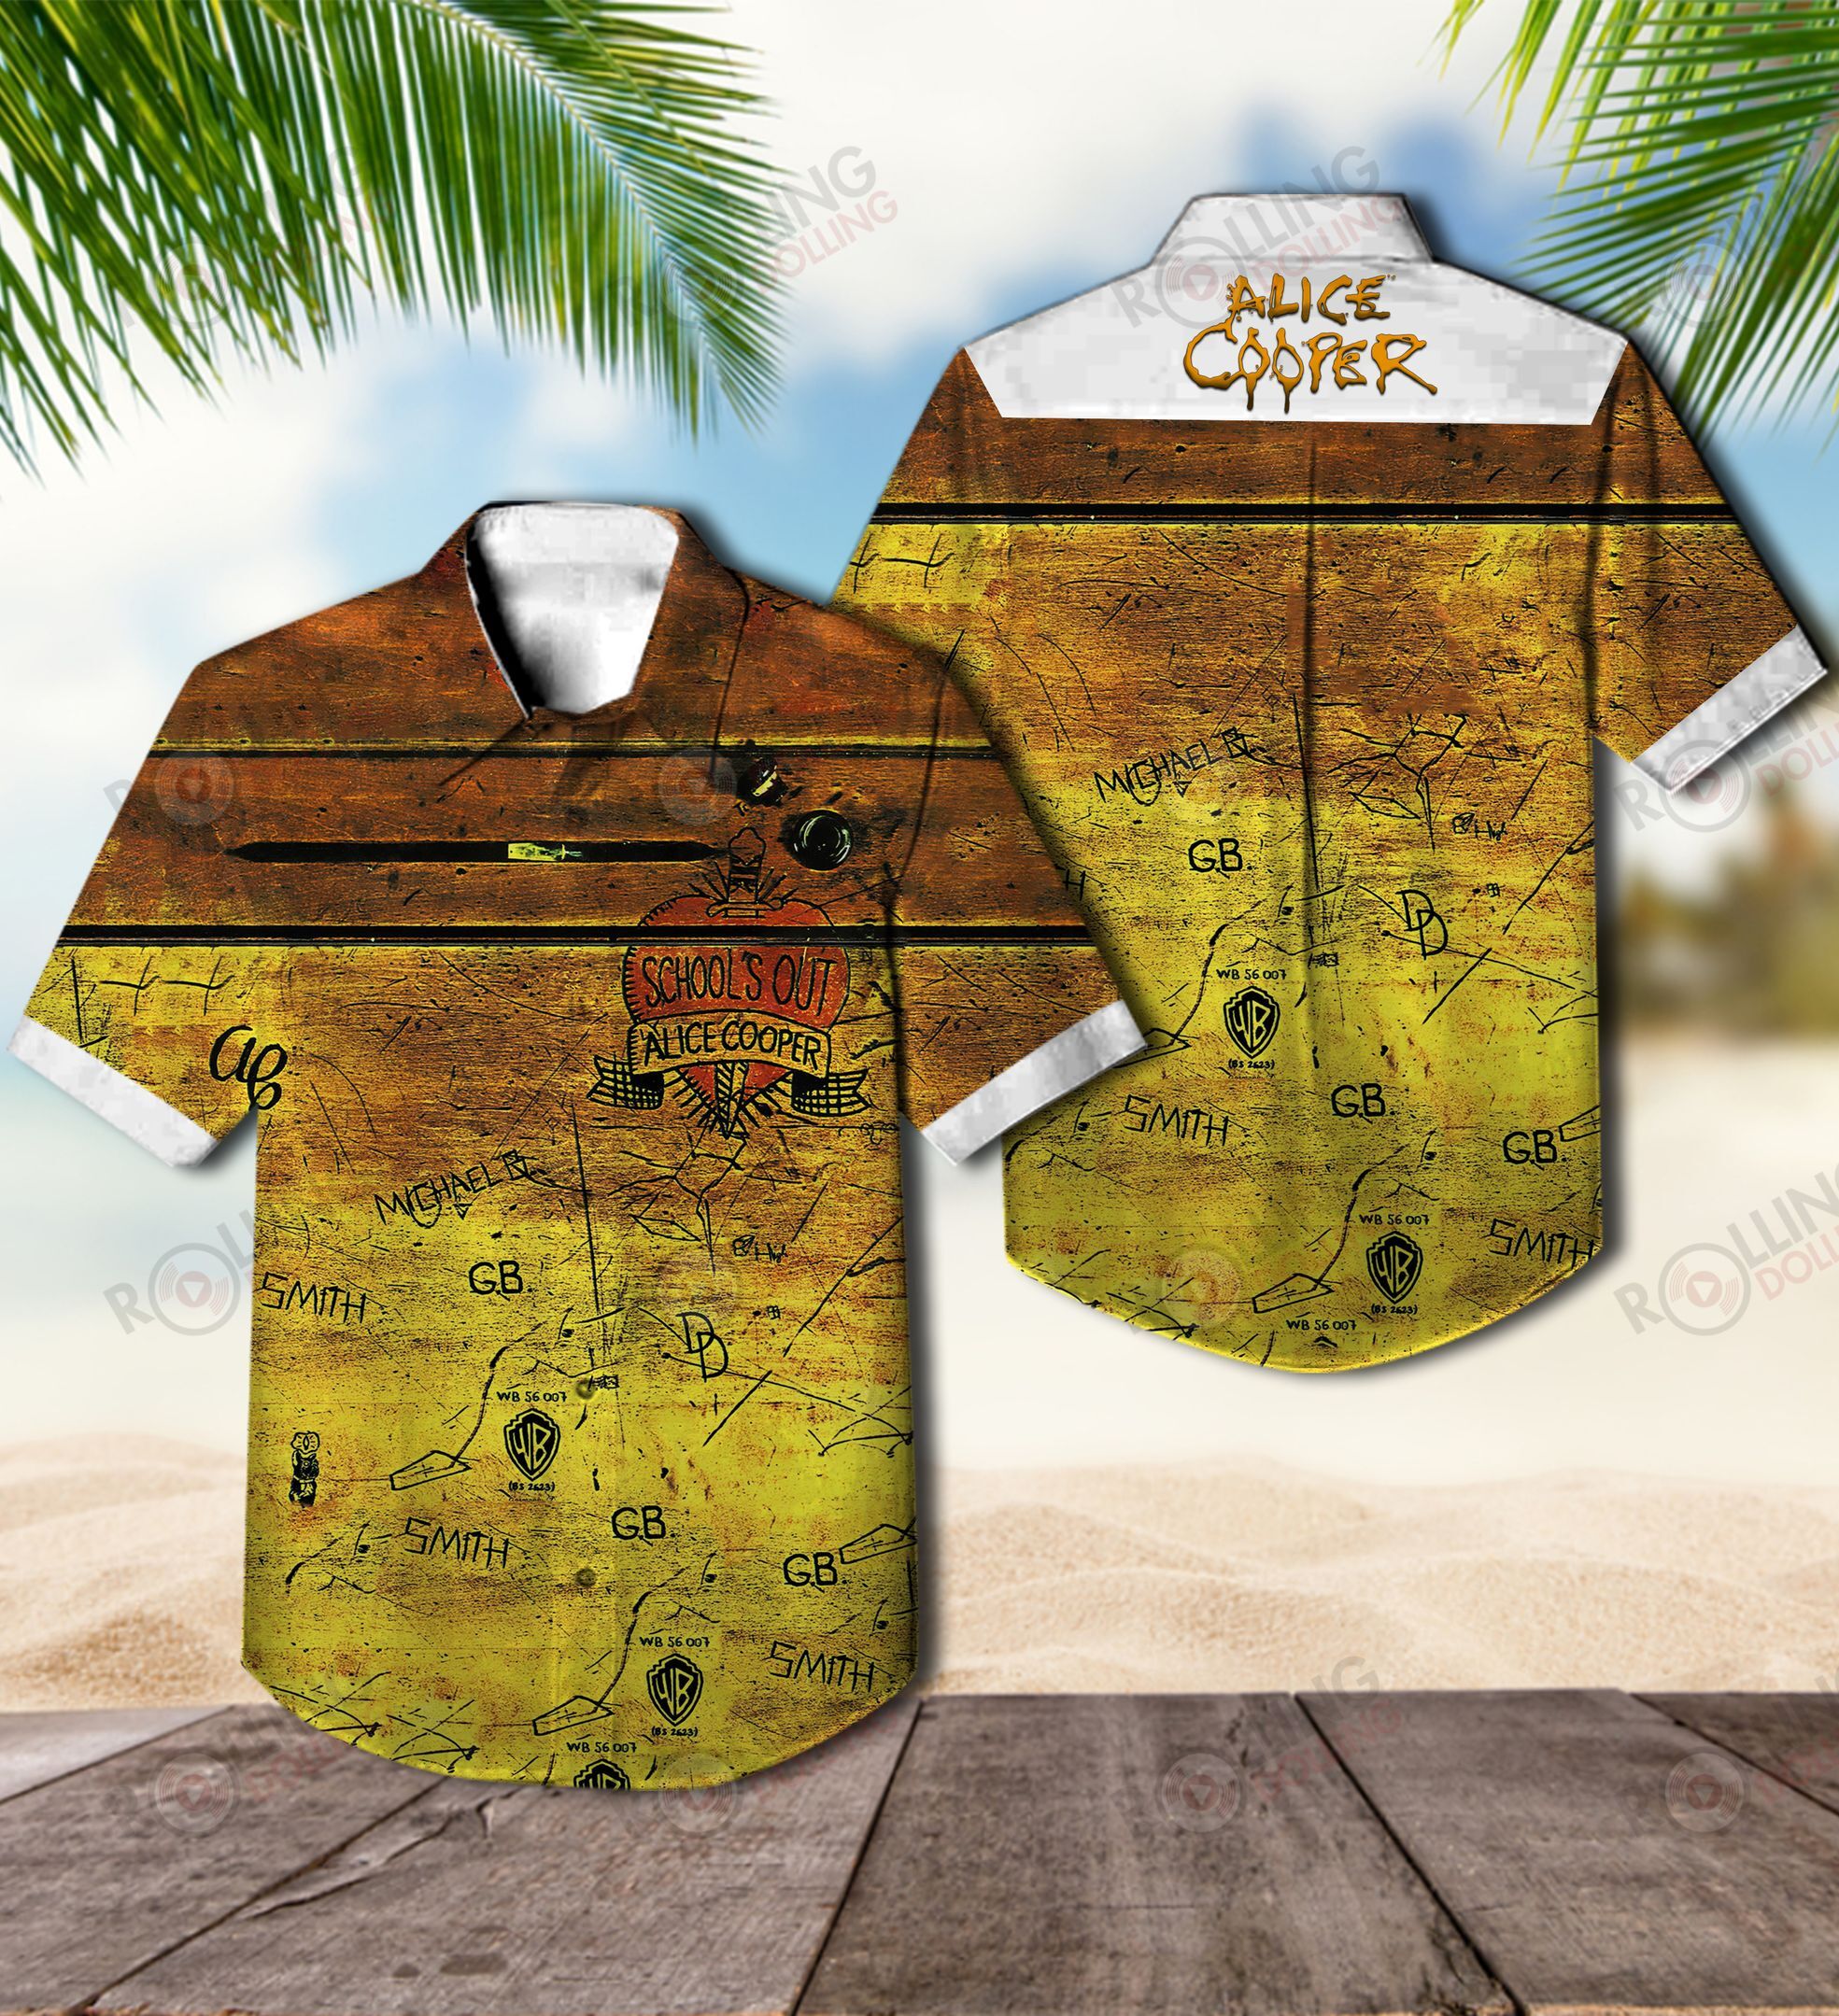 For summer, consider wearing This Amazing Hawaiian Shirt shirt in our store 31